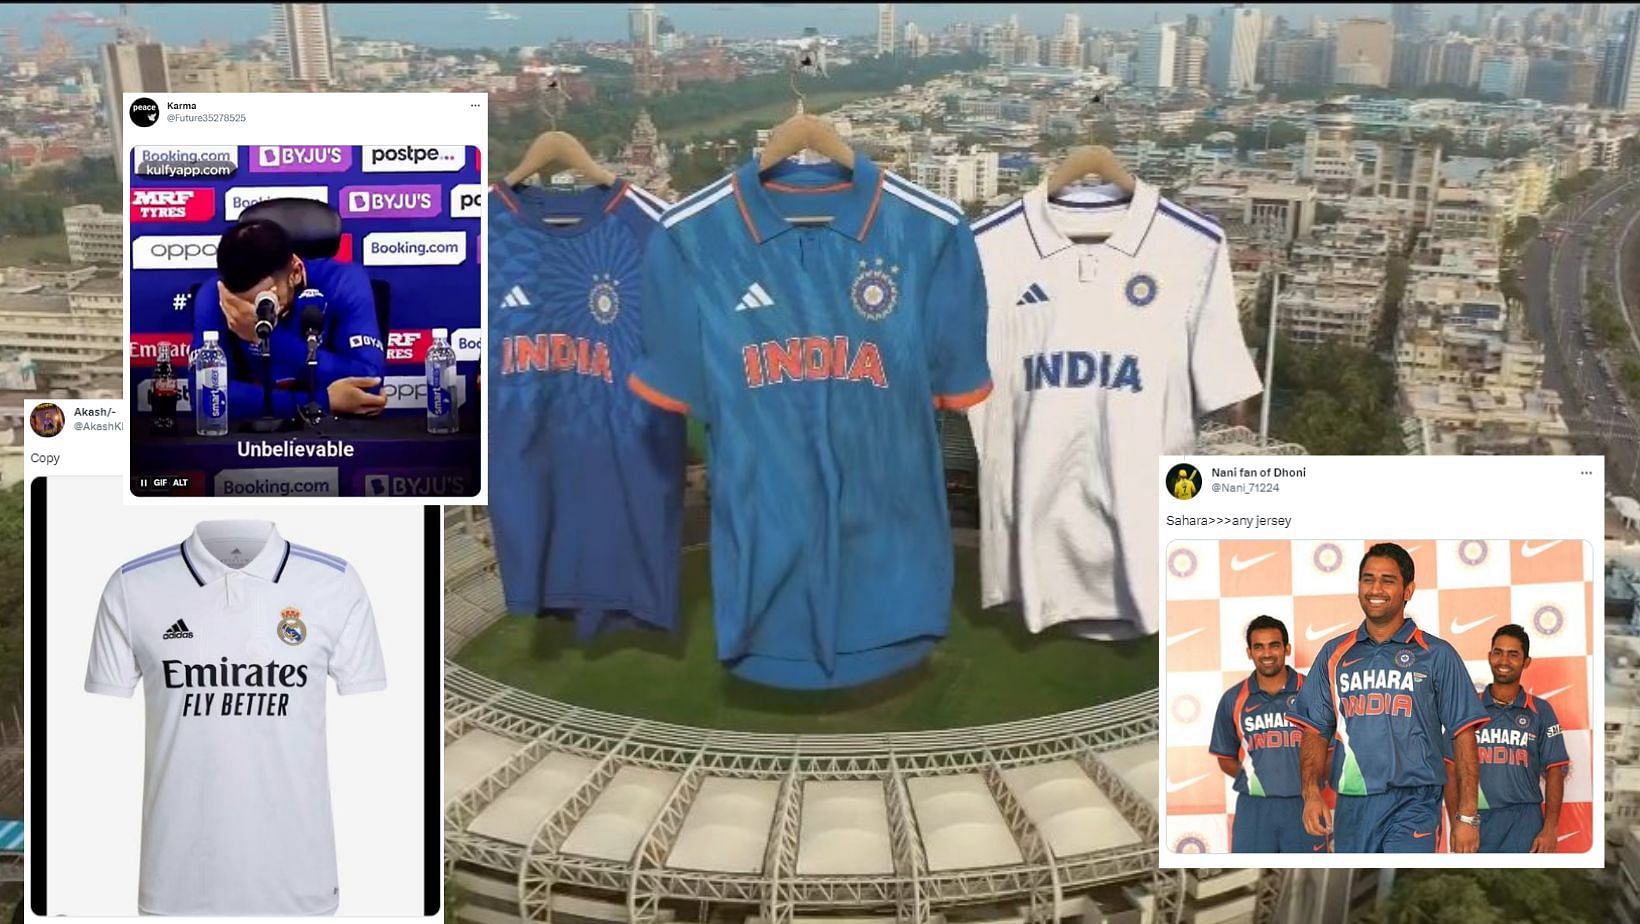 Twitter reactions to India